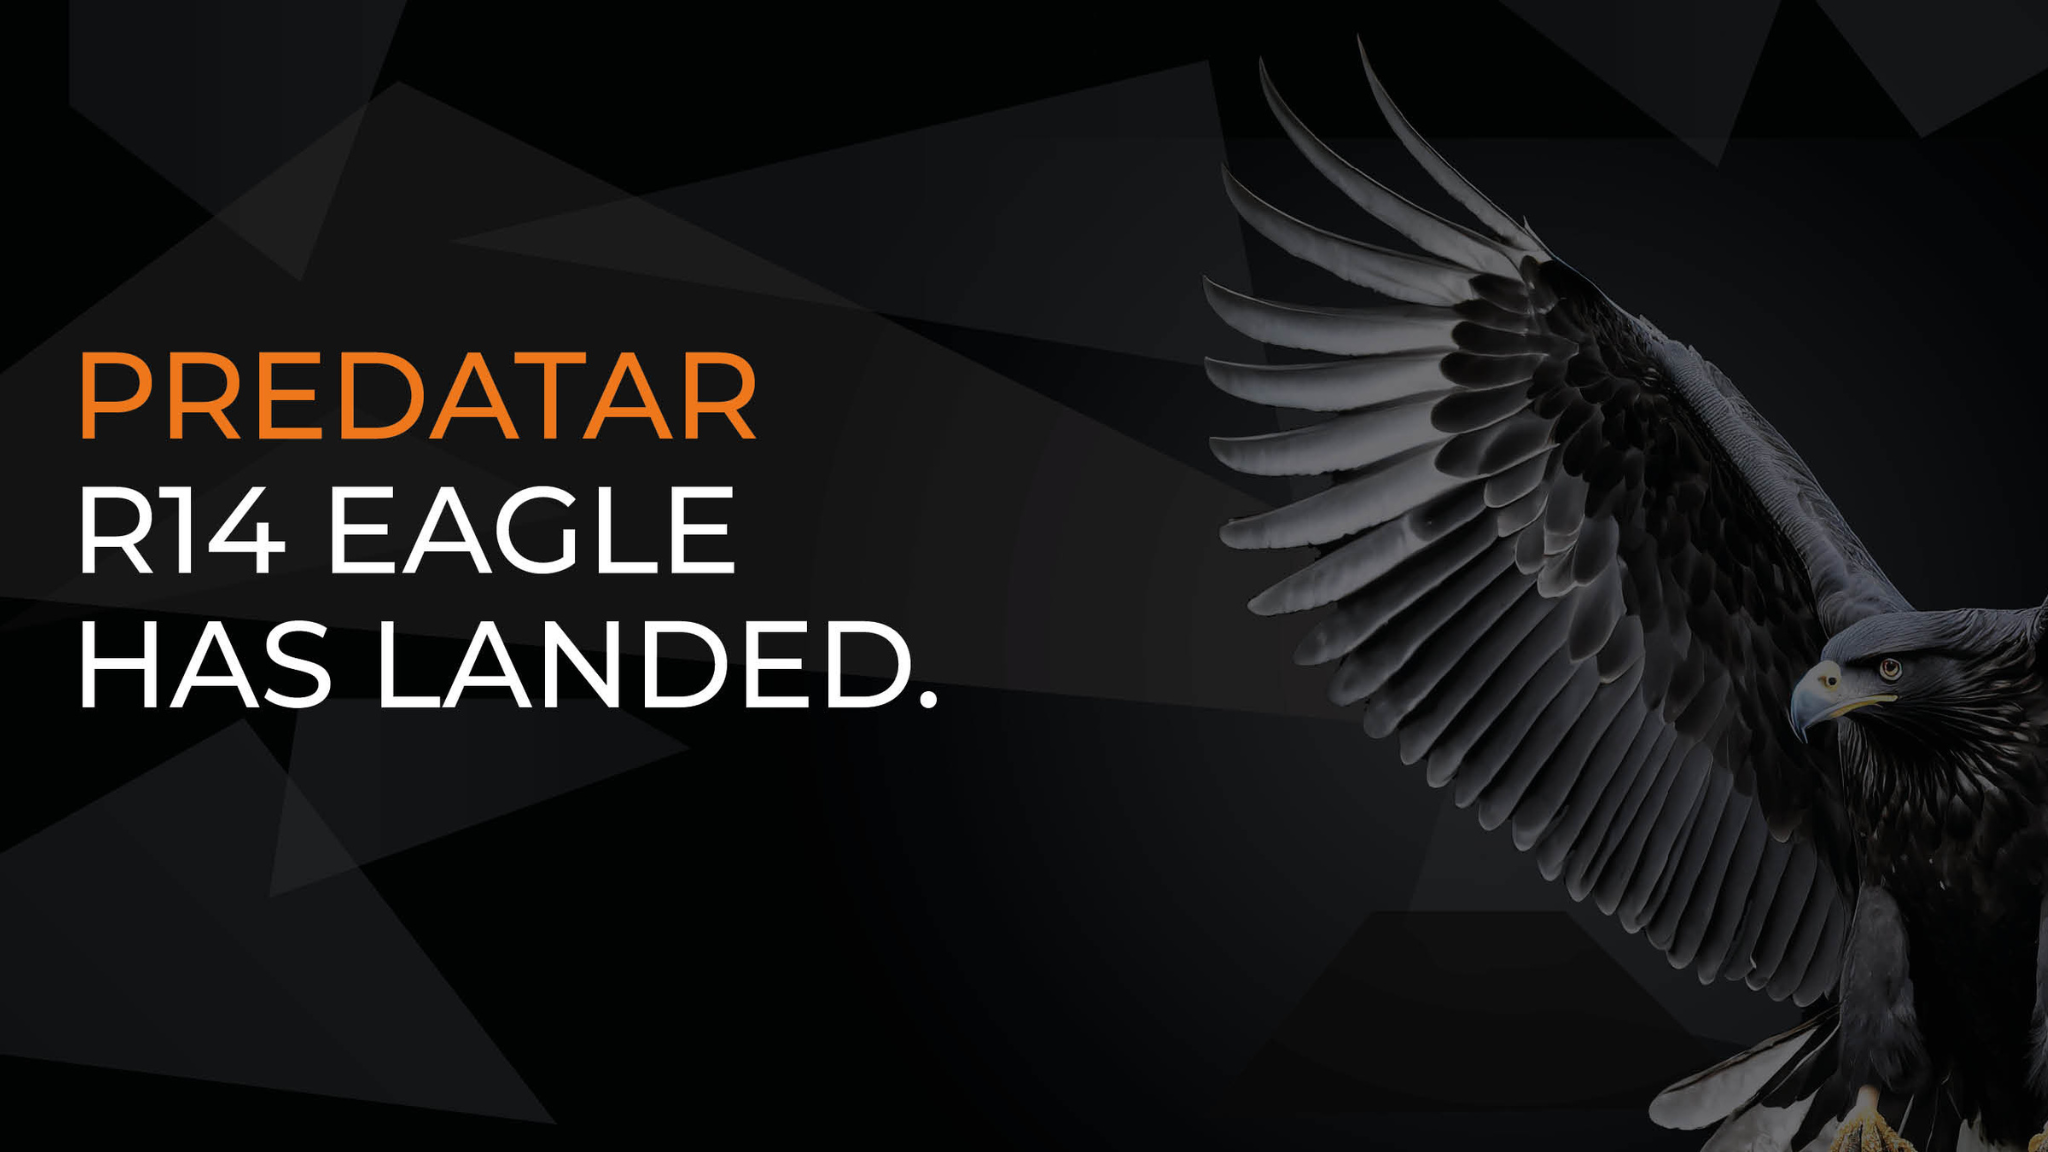 Predatar Release R14 Eagle with Veeam raises the bar for resiliency and takes our unique Recovery Assurance to even more organisations.